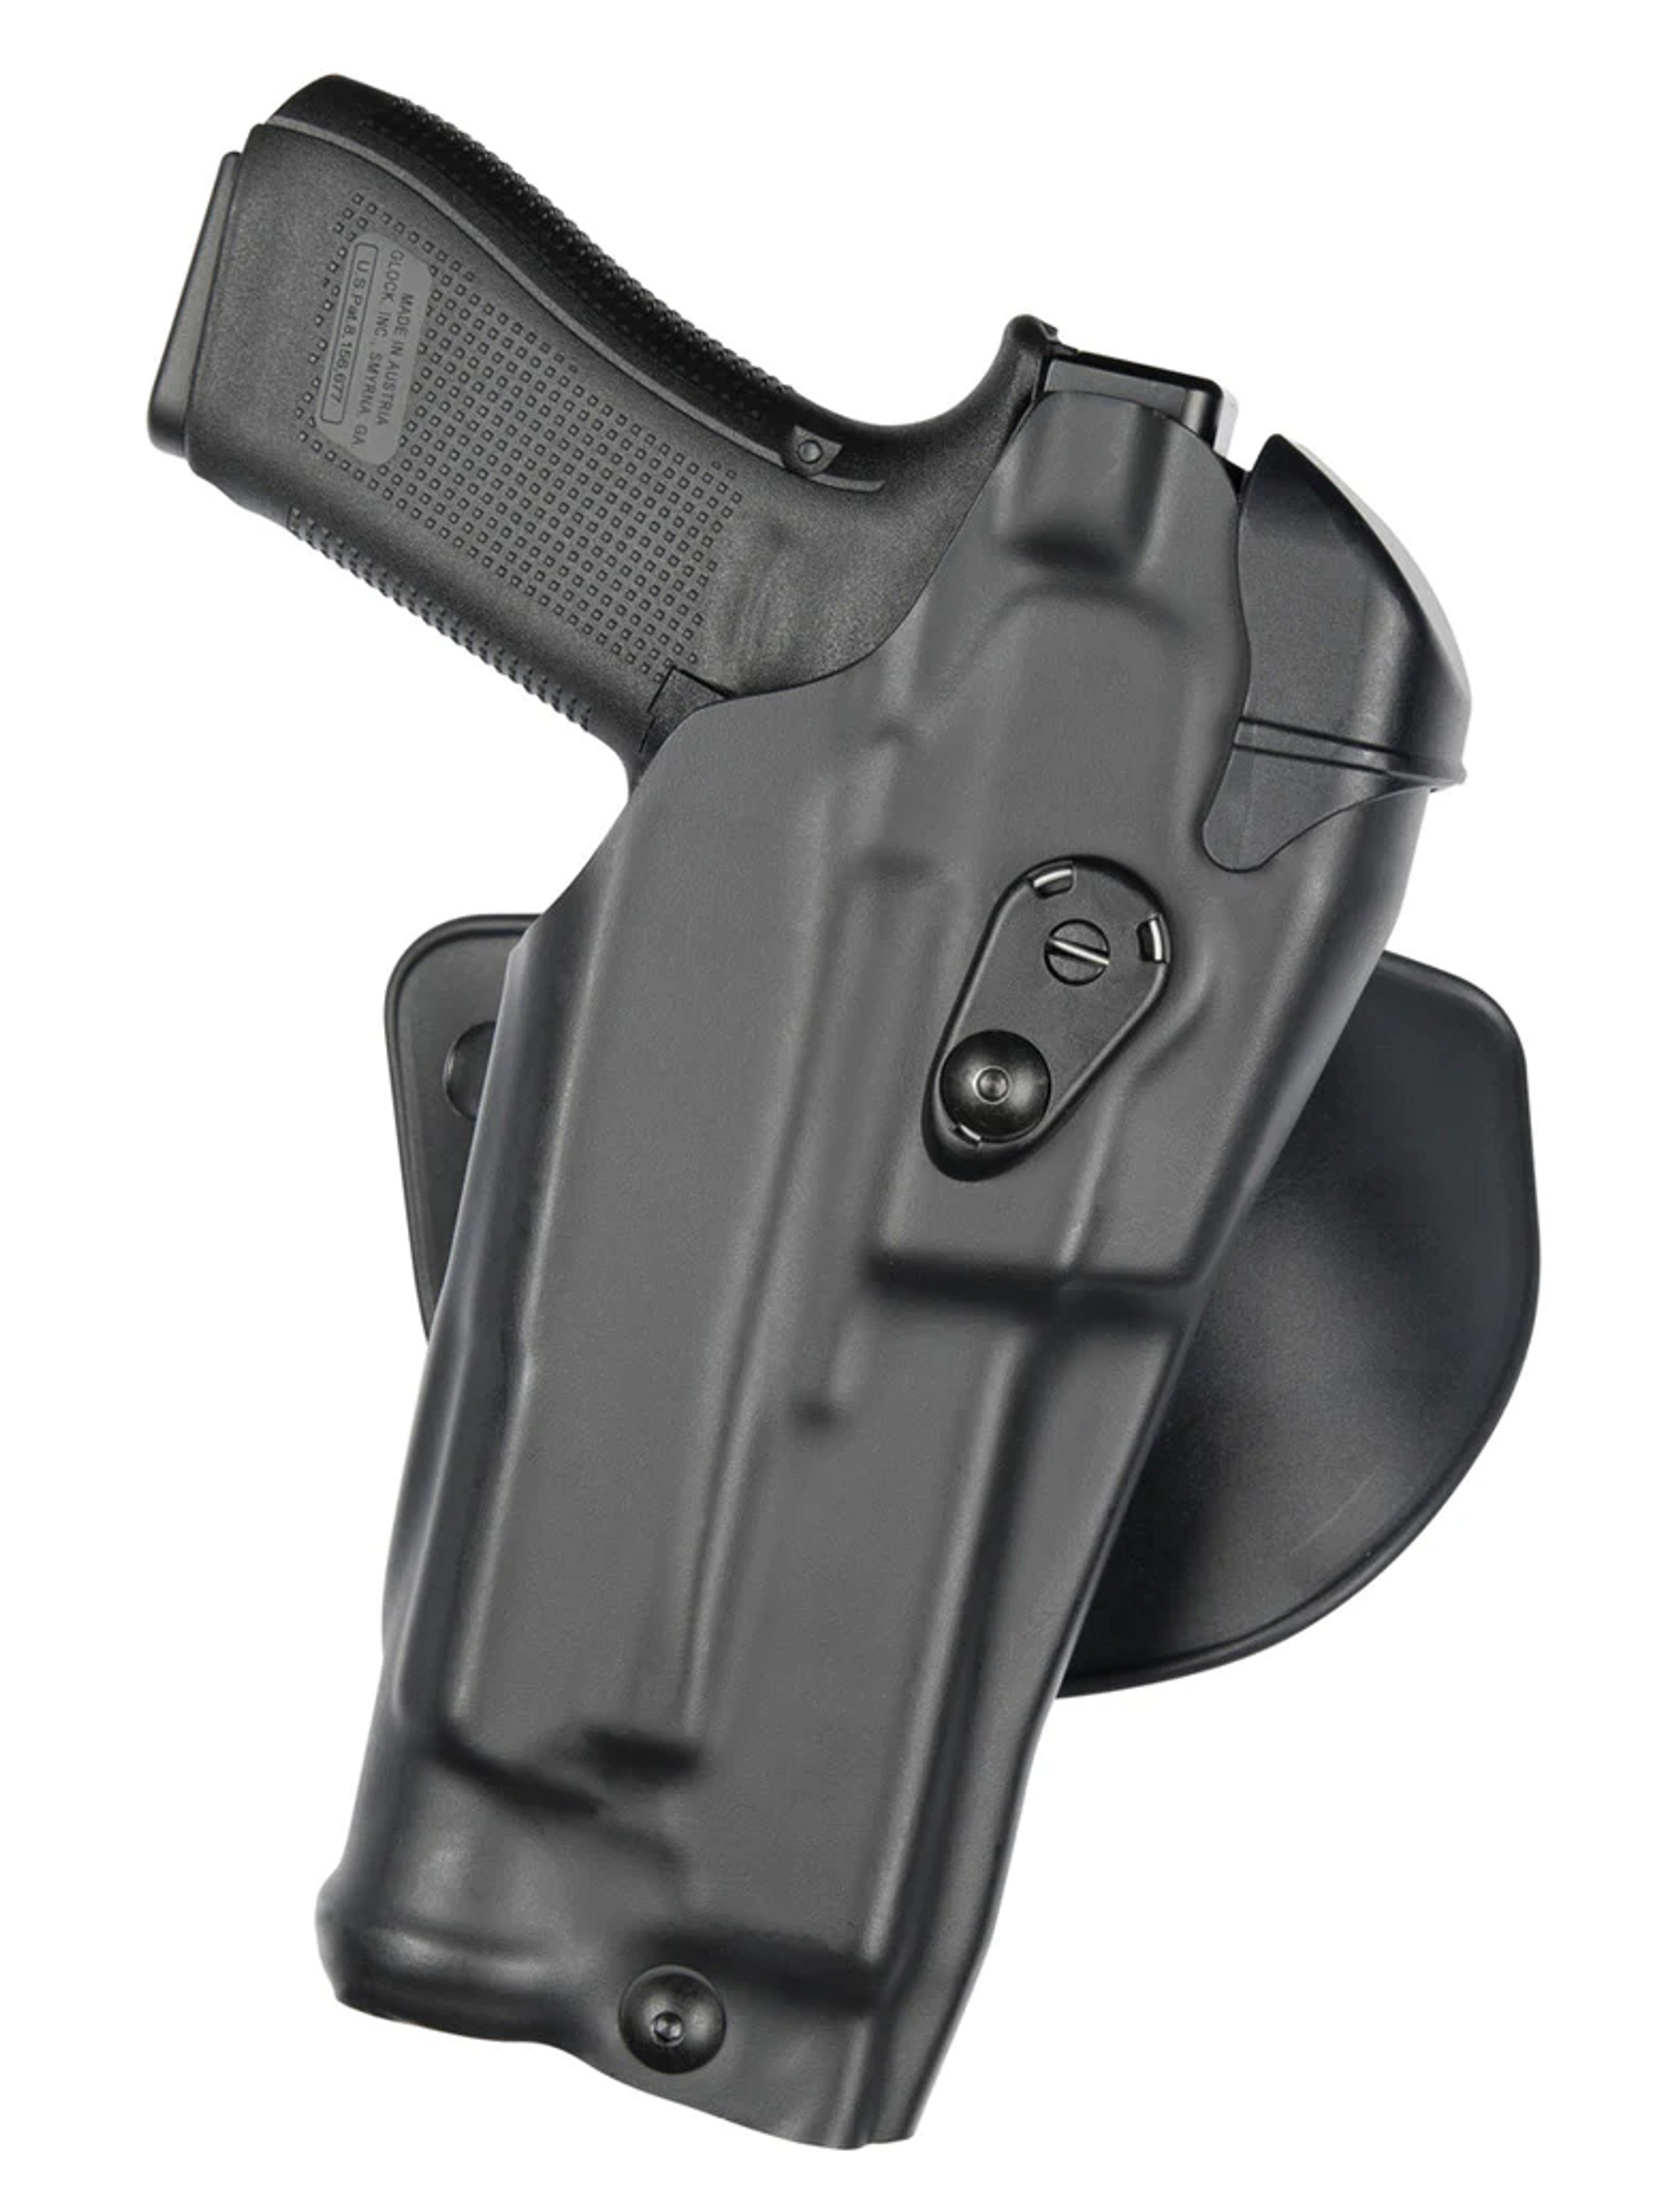 Model 6378rds Als Concealment Paddle Holster For Glock 17 Mos W/ Light - KR6378RDS-832-412